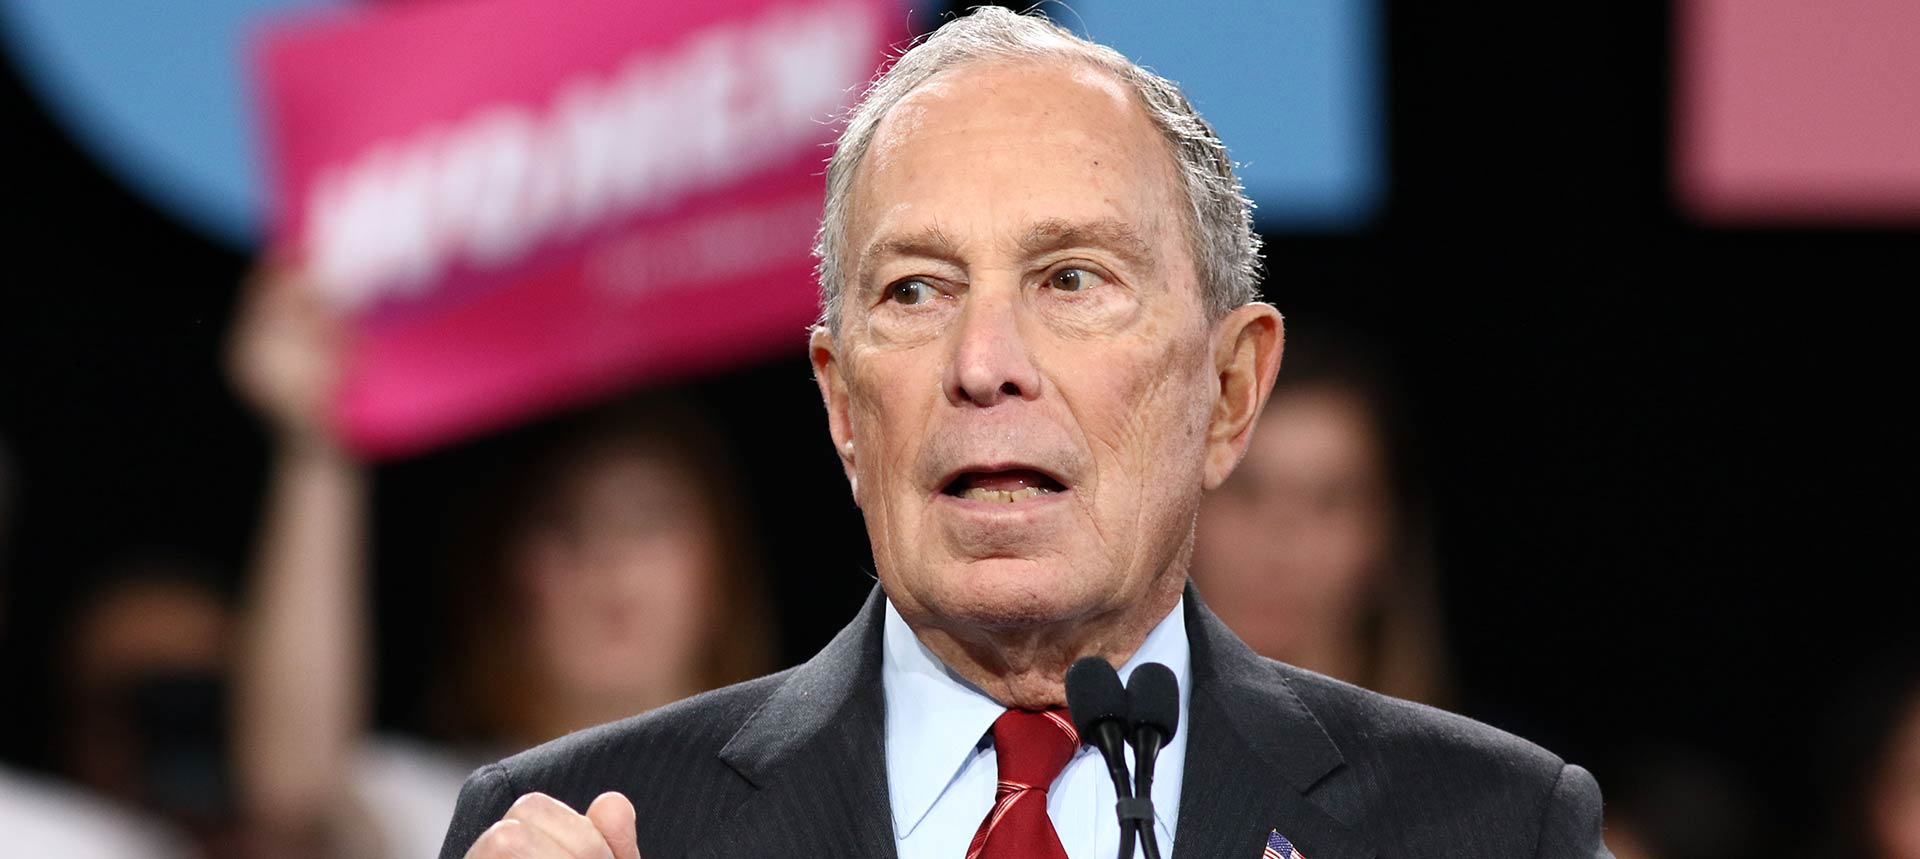 Michael Bloomberg news, Michael Bloomberg Democratic Party candidate, Michael Bloomberg presidential bid, Michael Bloomberg campaign news, Michael Bloomberg Instagram news, Michael Bloomberg Democrats, Michael Bloomberg net worth, Michael Bloomberg 2020, Democratic Party primaries, Democratic candidate 2020